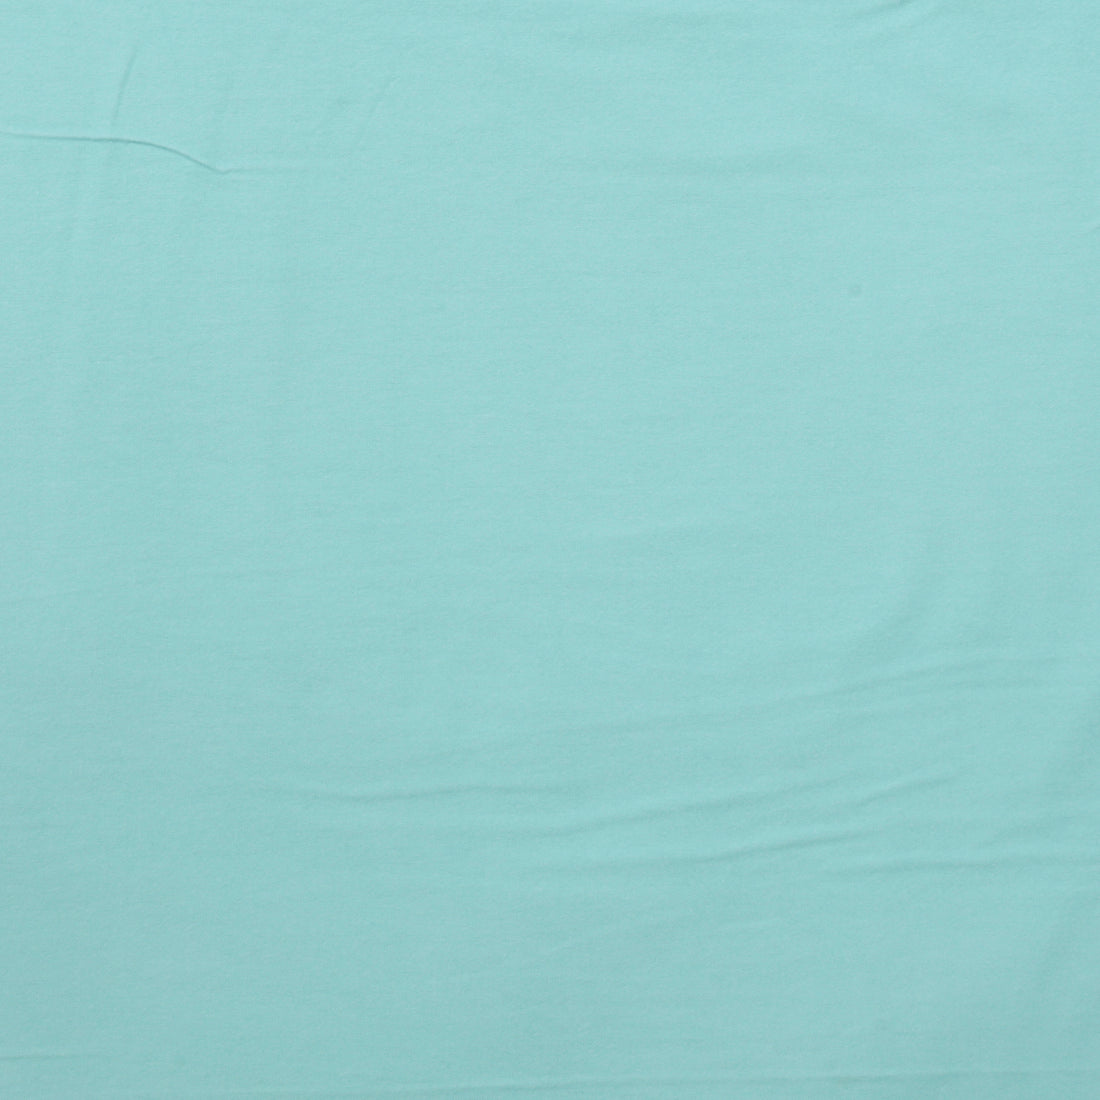 Cloud 9 - Flannel - Winter Forest - Solids - Turquoise